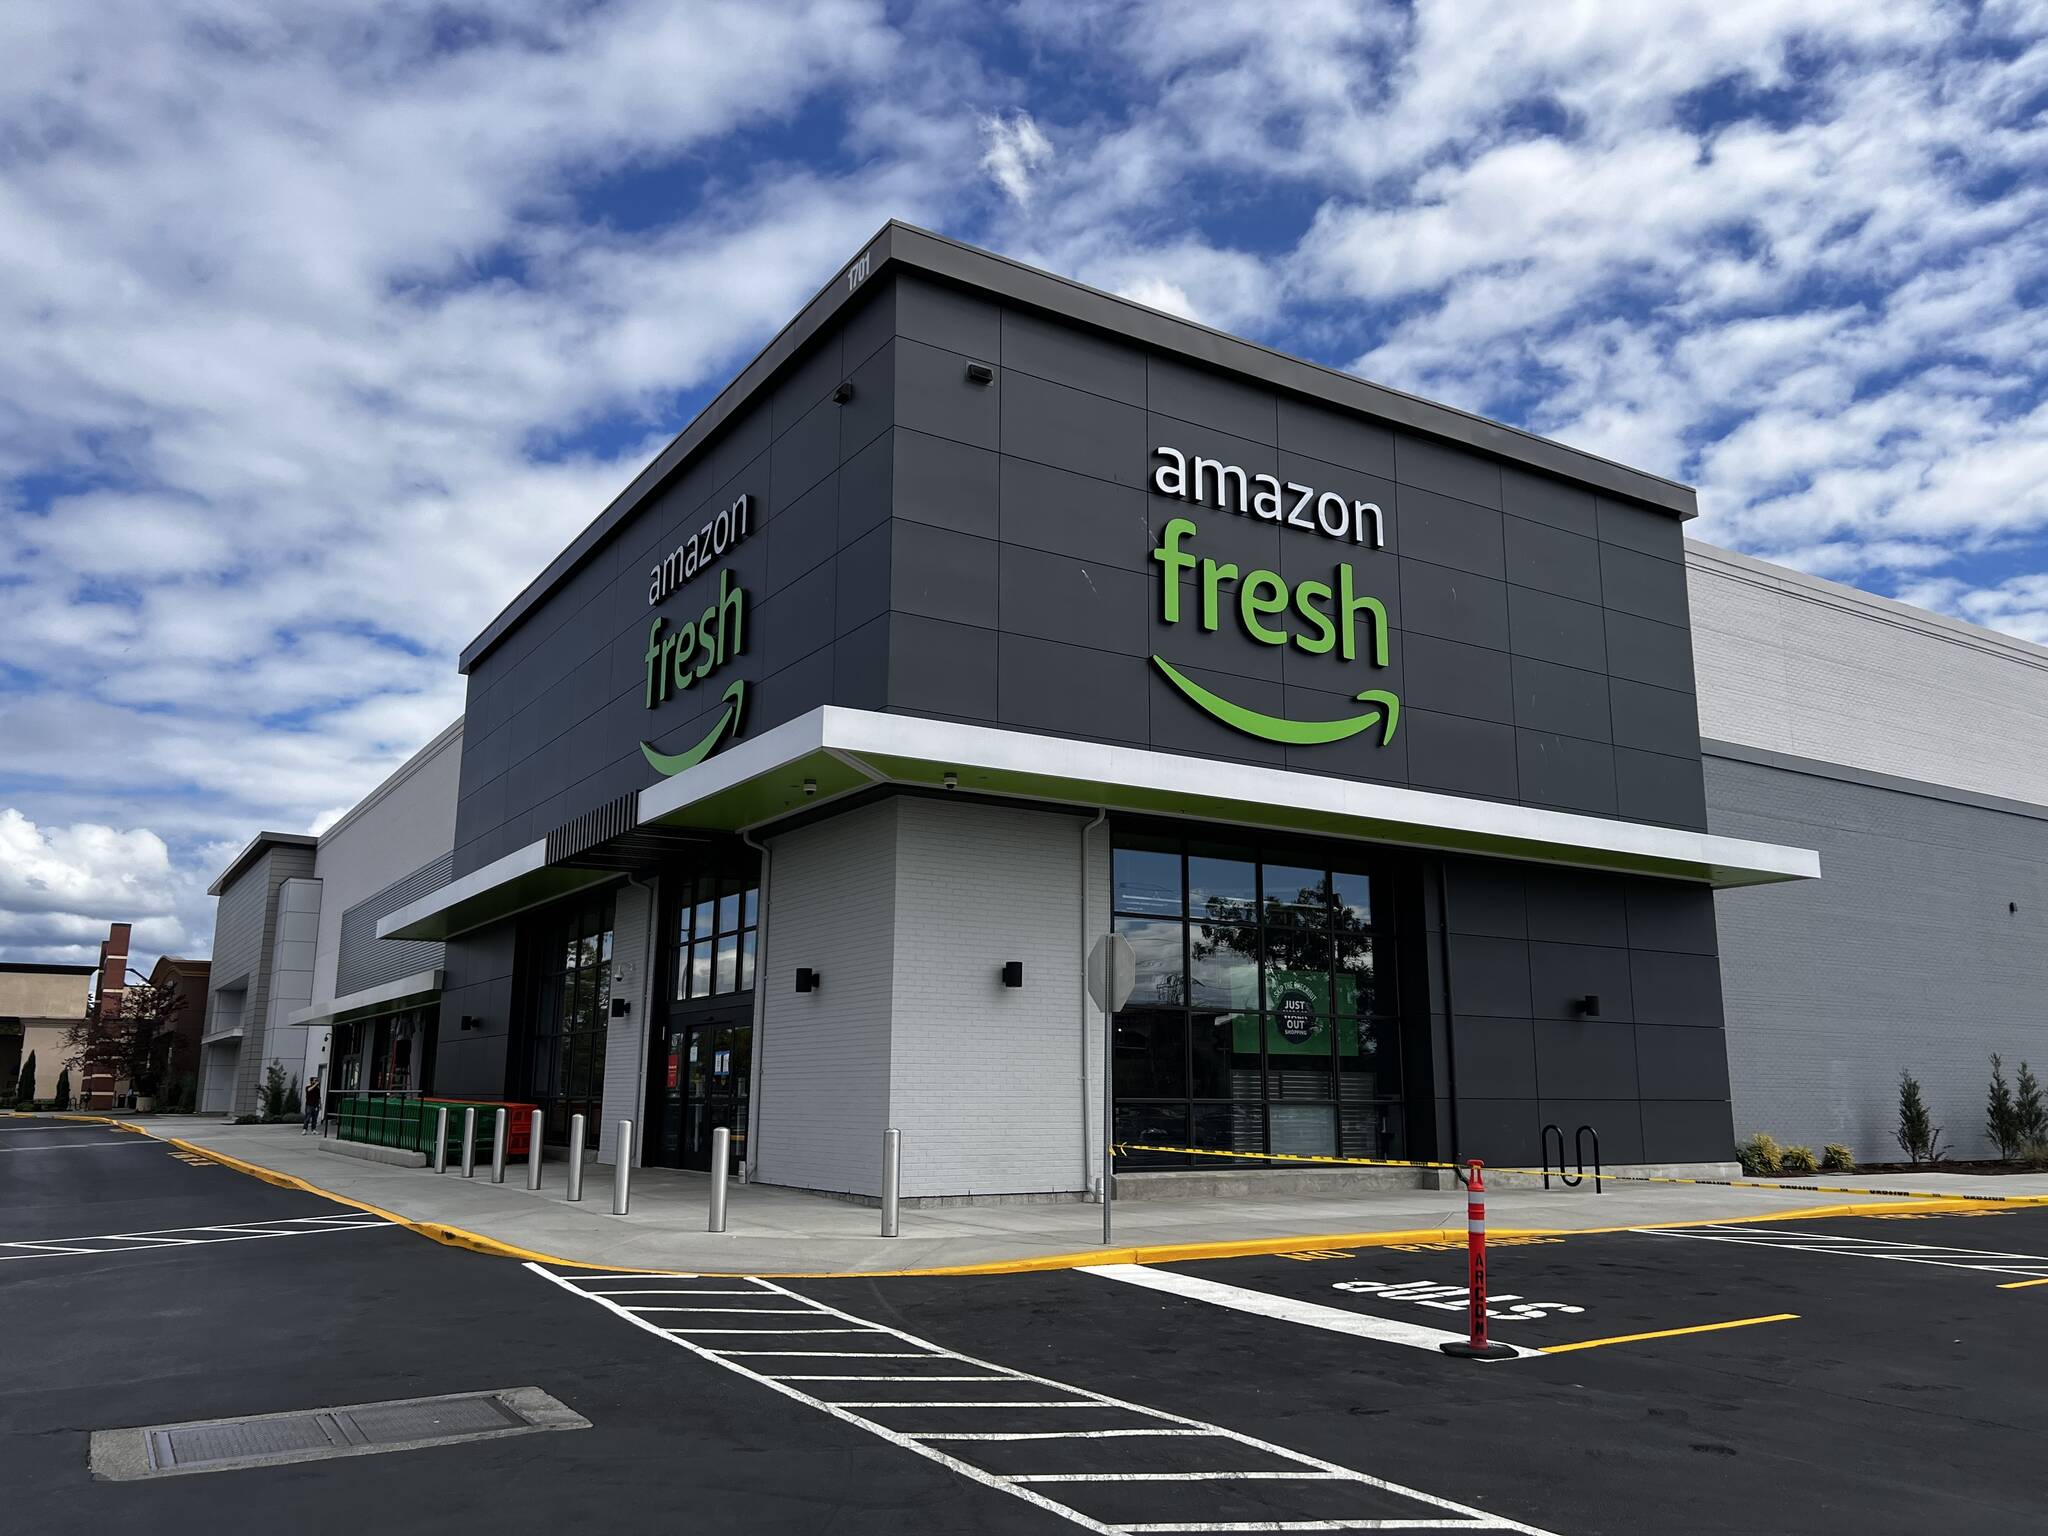 The new Amazon Fresh store replaces the former Sears location at The Commons mall in Federal Way. Cameron Sheppard/Sound Publishing